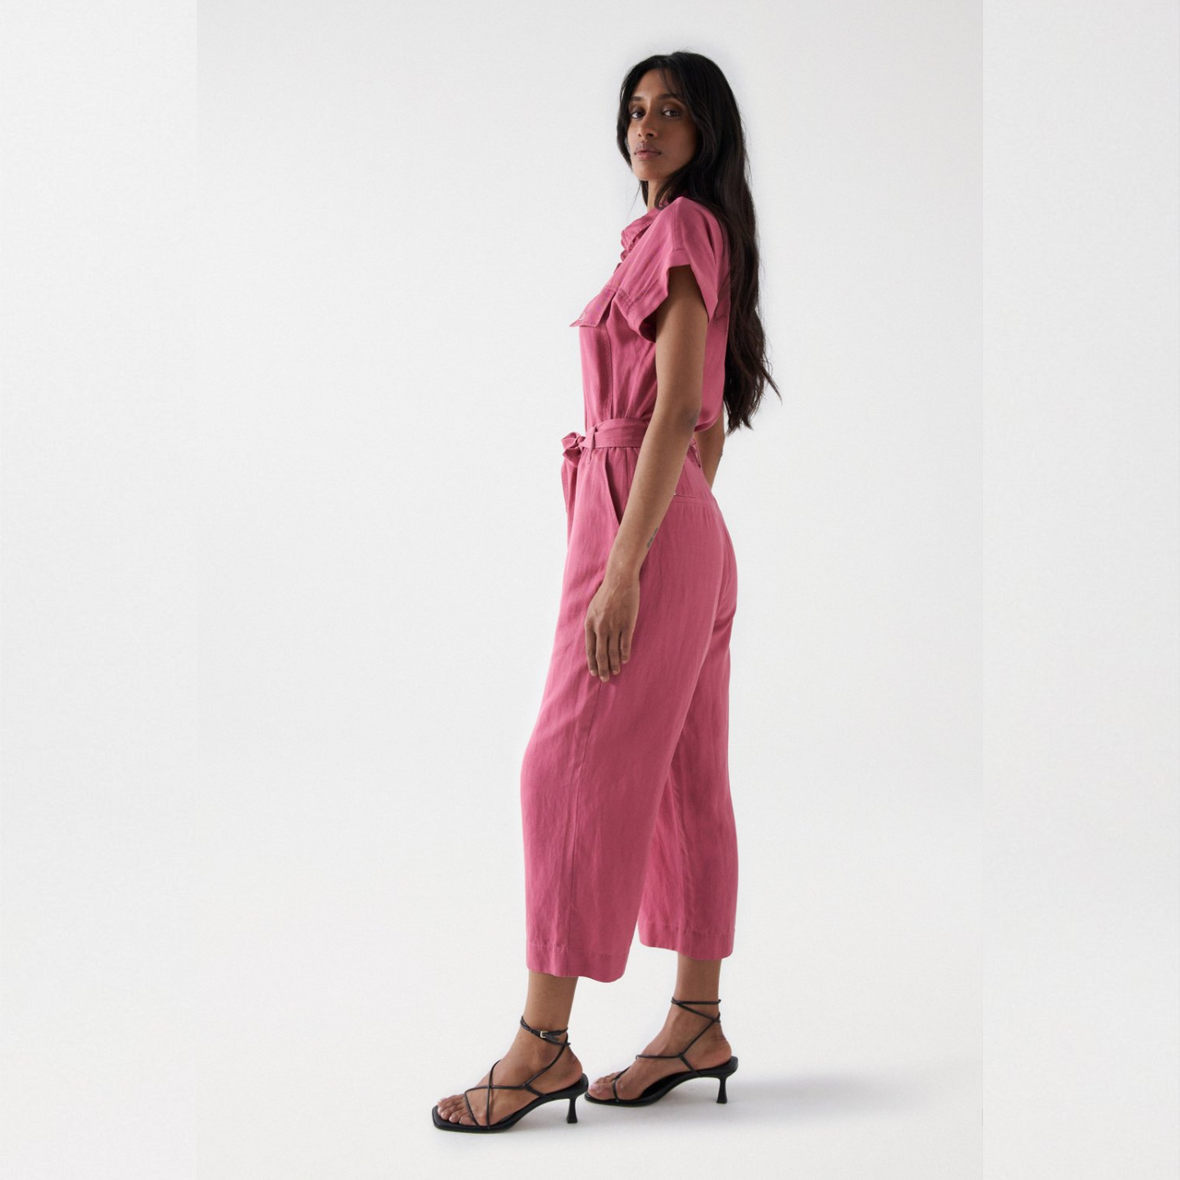 Model with long dark hair standing sideways wearing Salsa cropped leg jumpsuit in old pink color. 